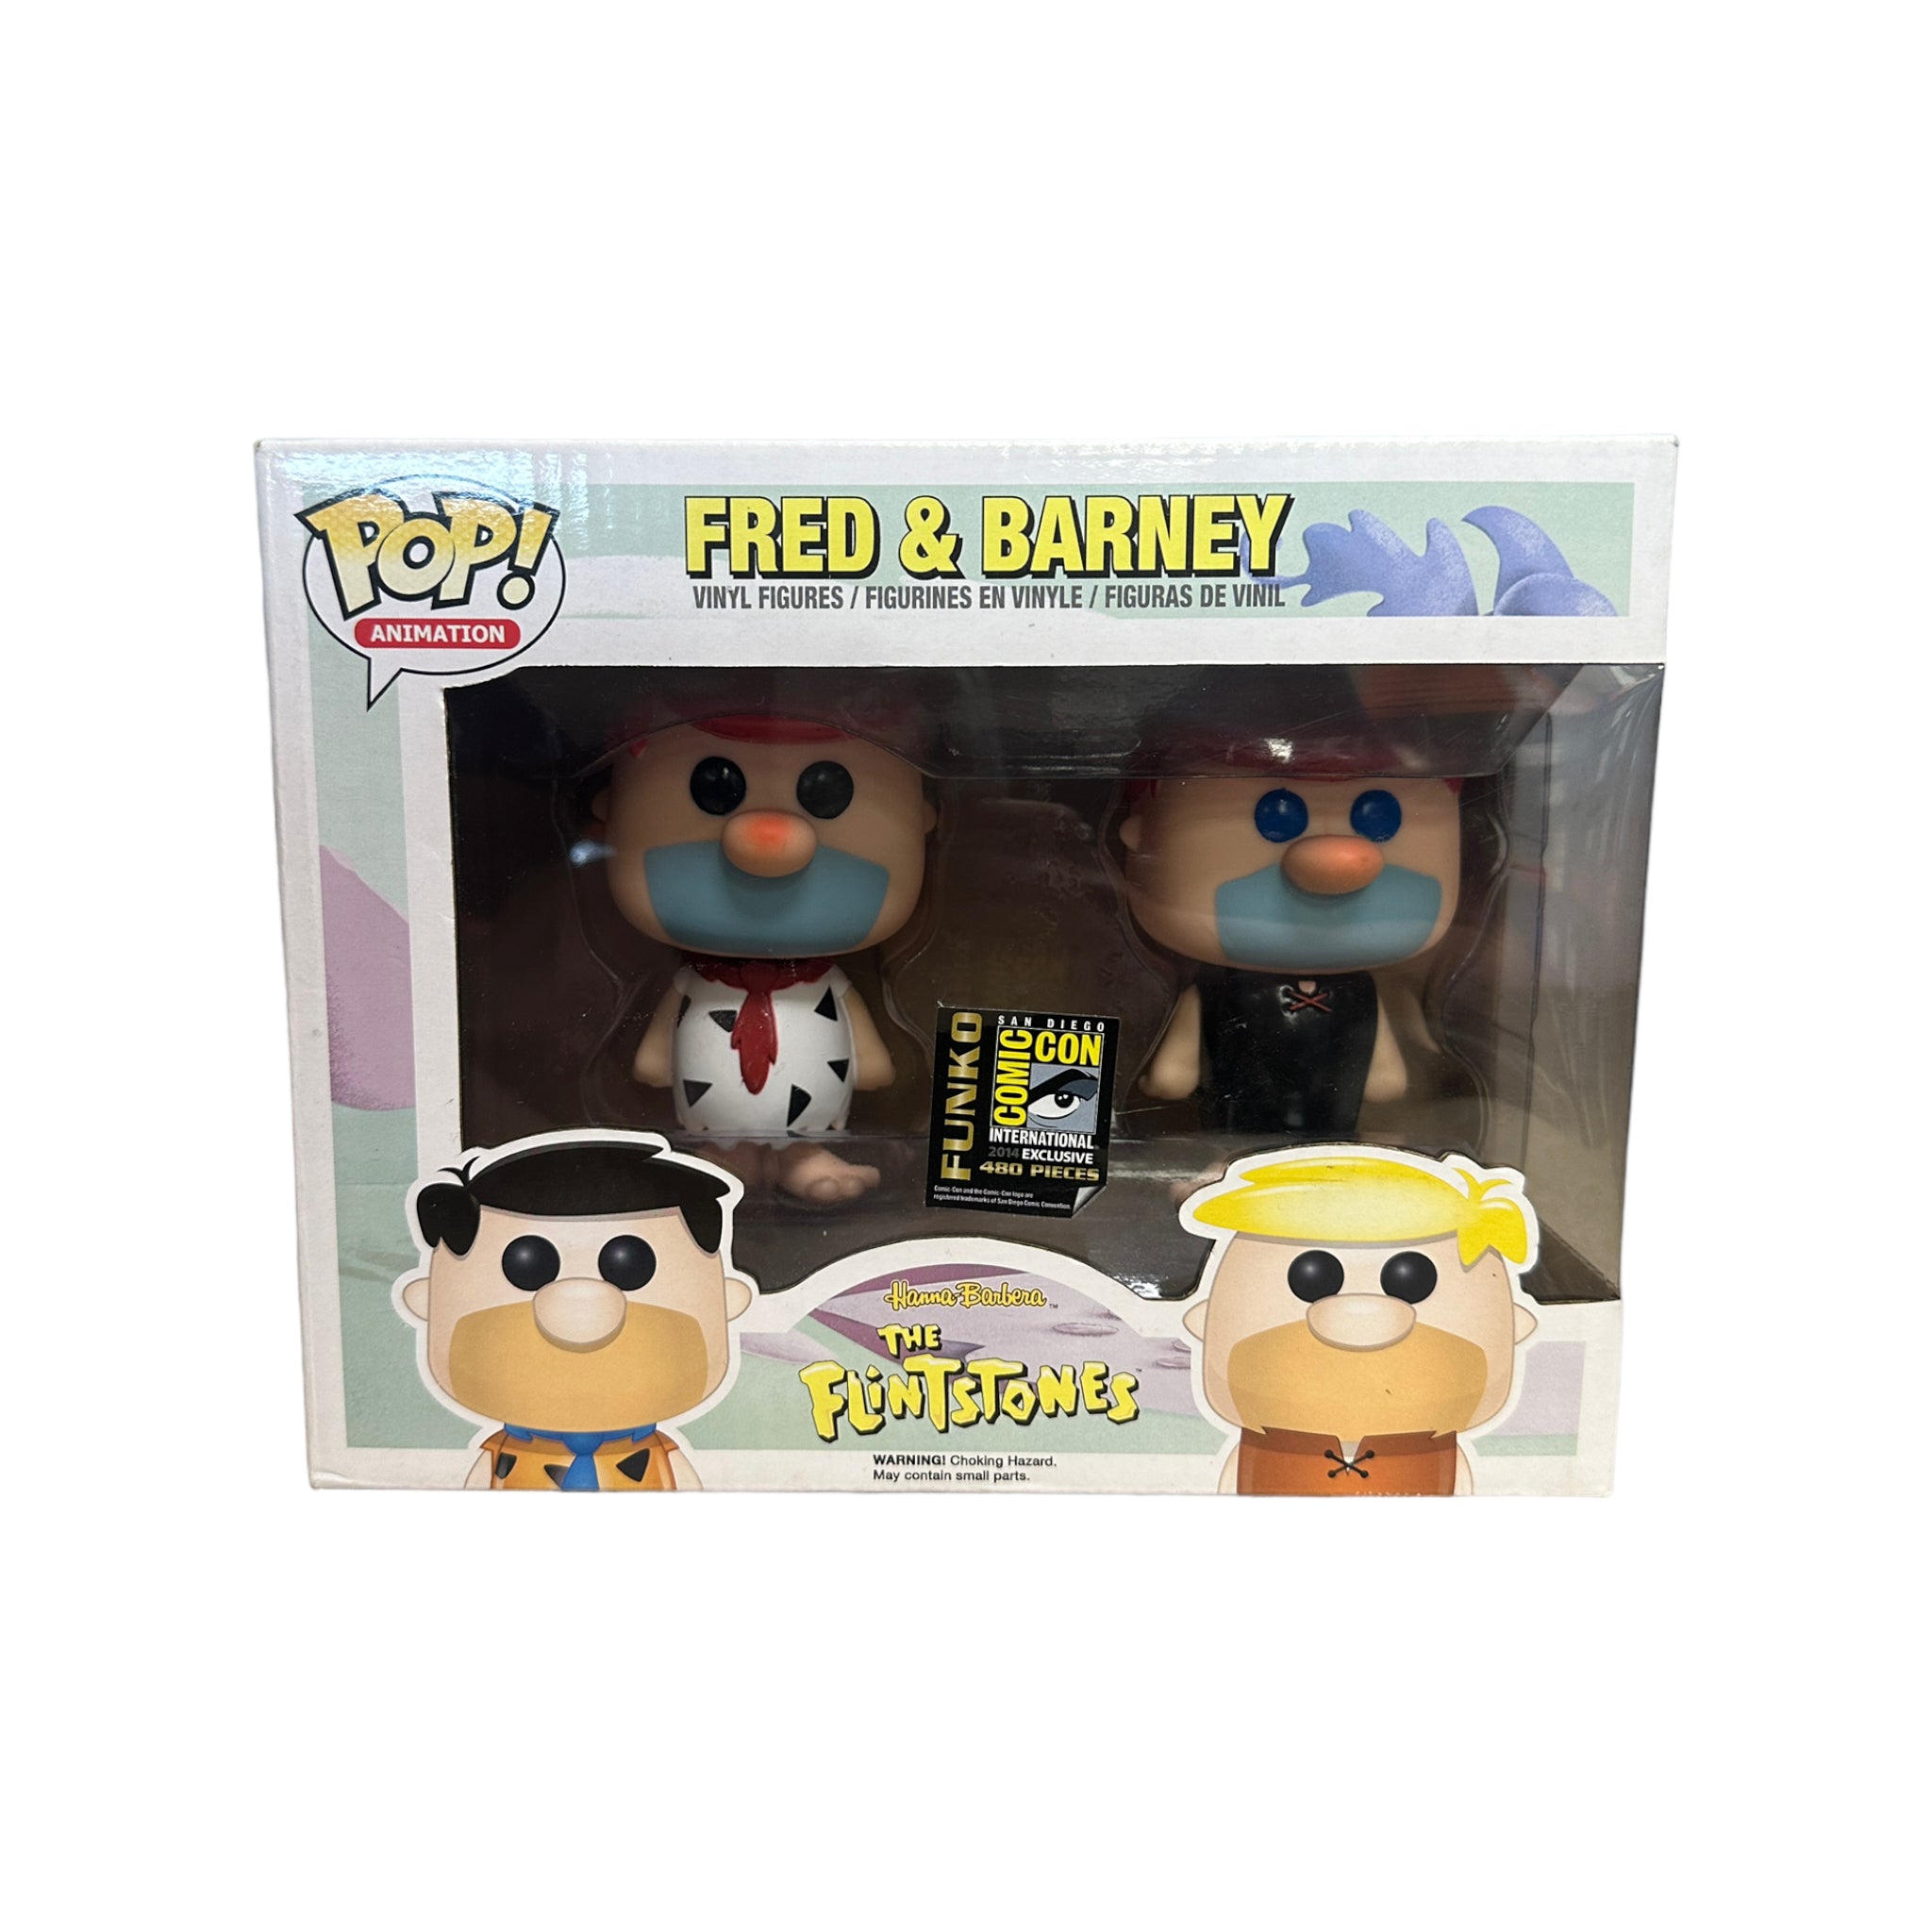 Fred & Barney (Red Hair) 2 Pack Funko Pop! - The Flintstones - SDCC 2014 Exclusive LE480 Pcs - Condition 7/10